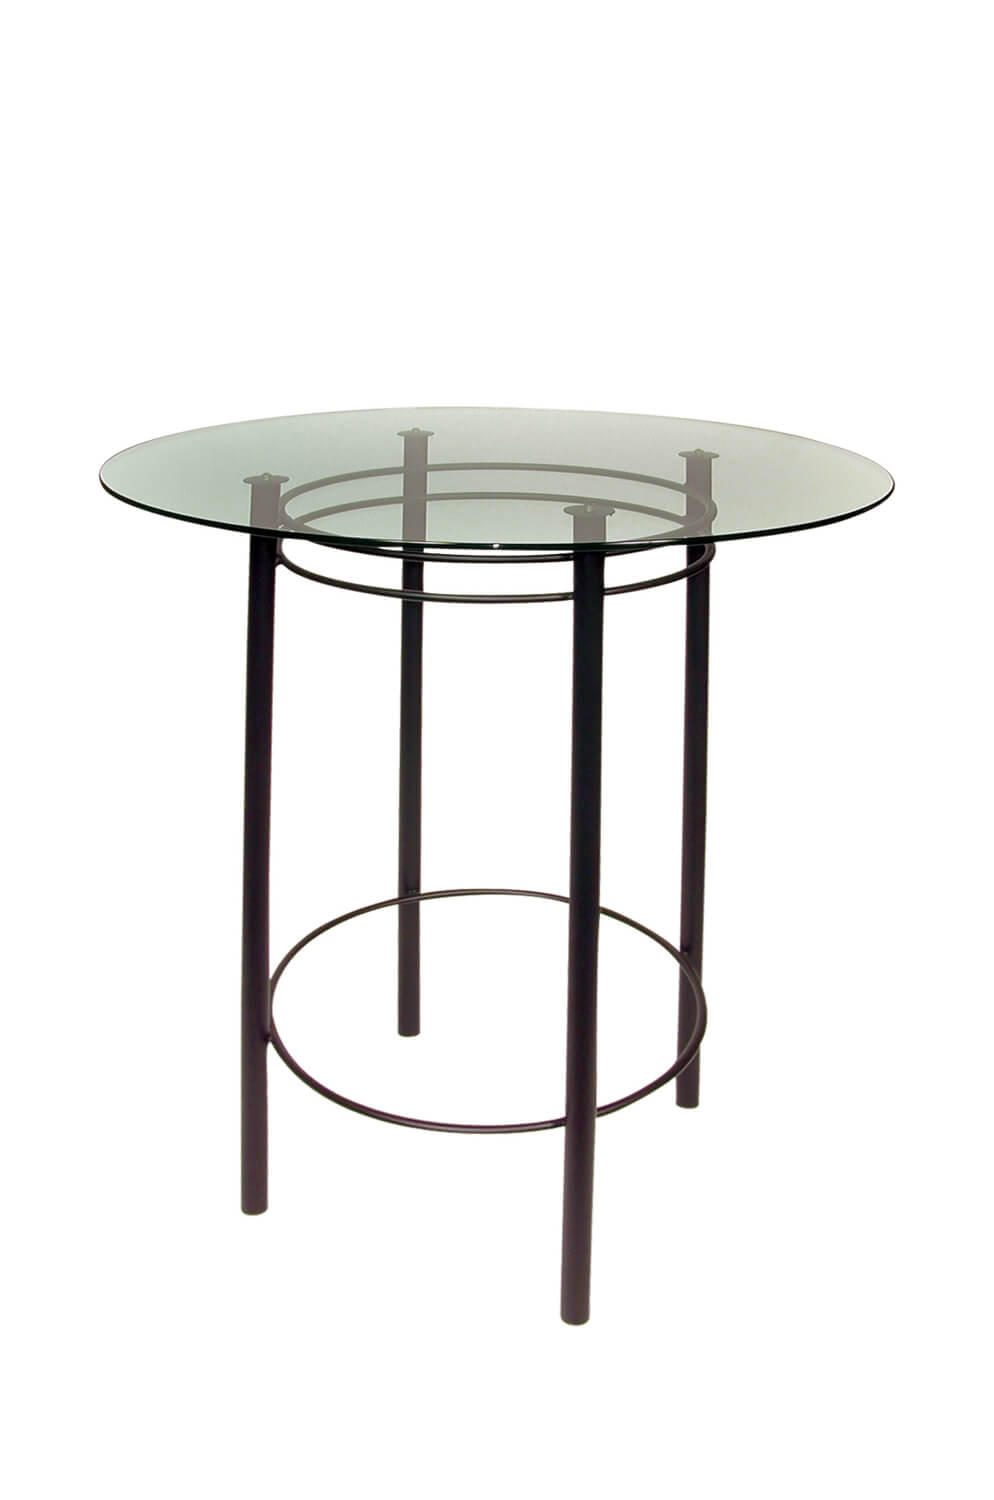 Trica S Astro Pub Table W Shatter, Round Dining Table Bar Height